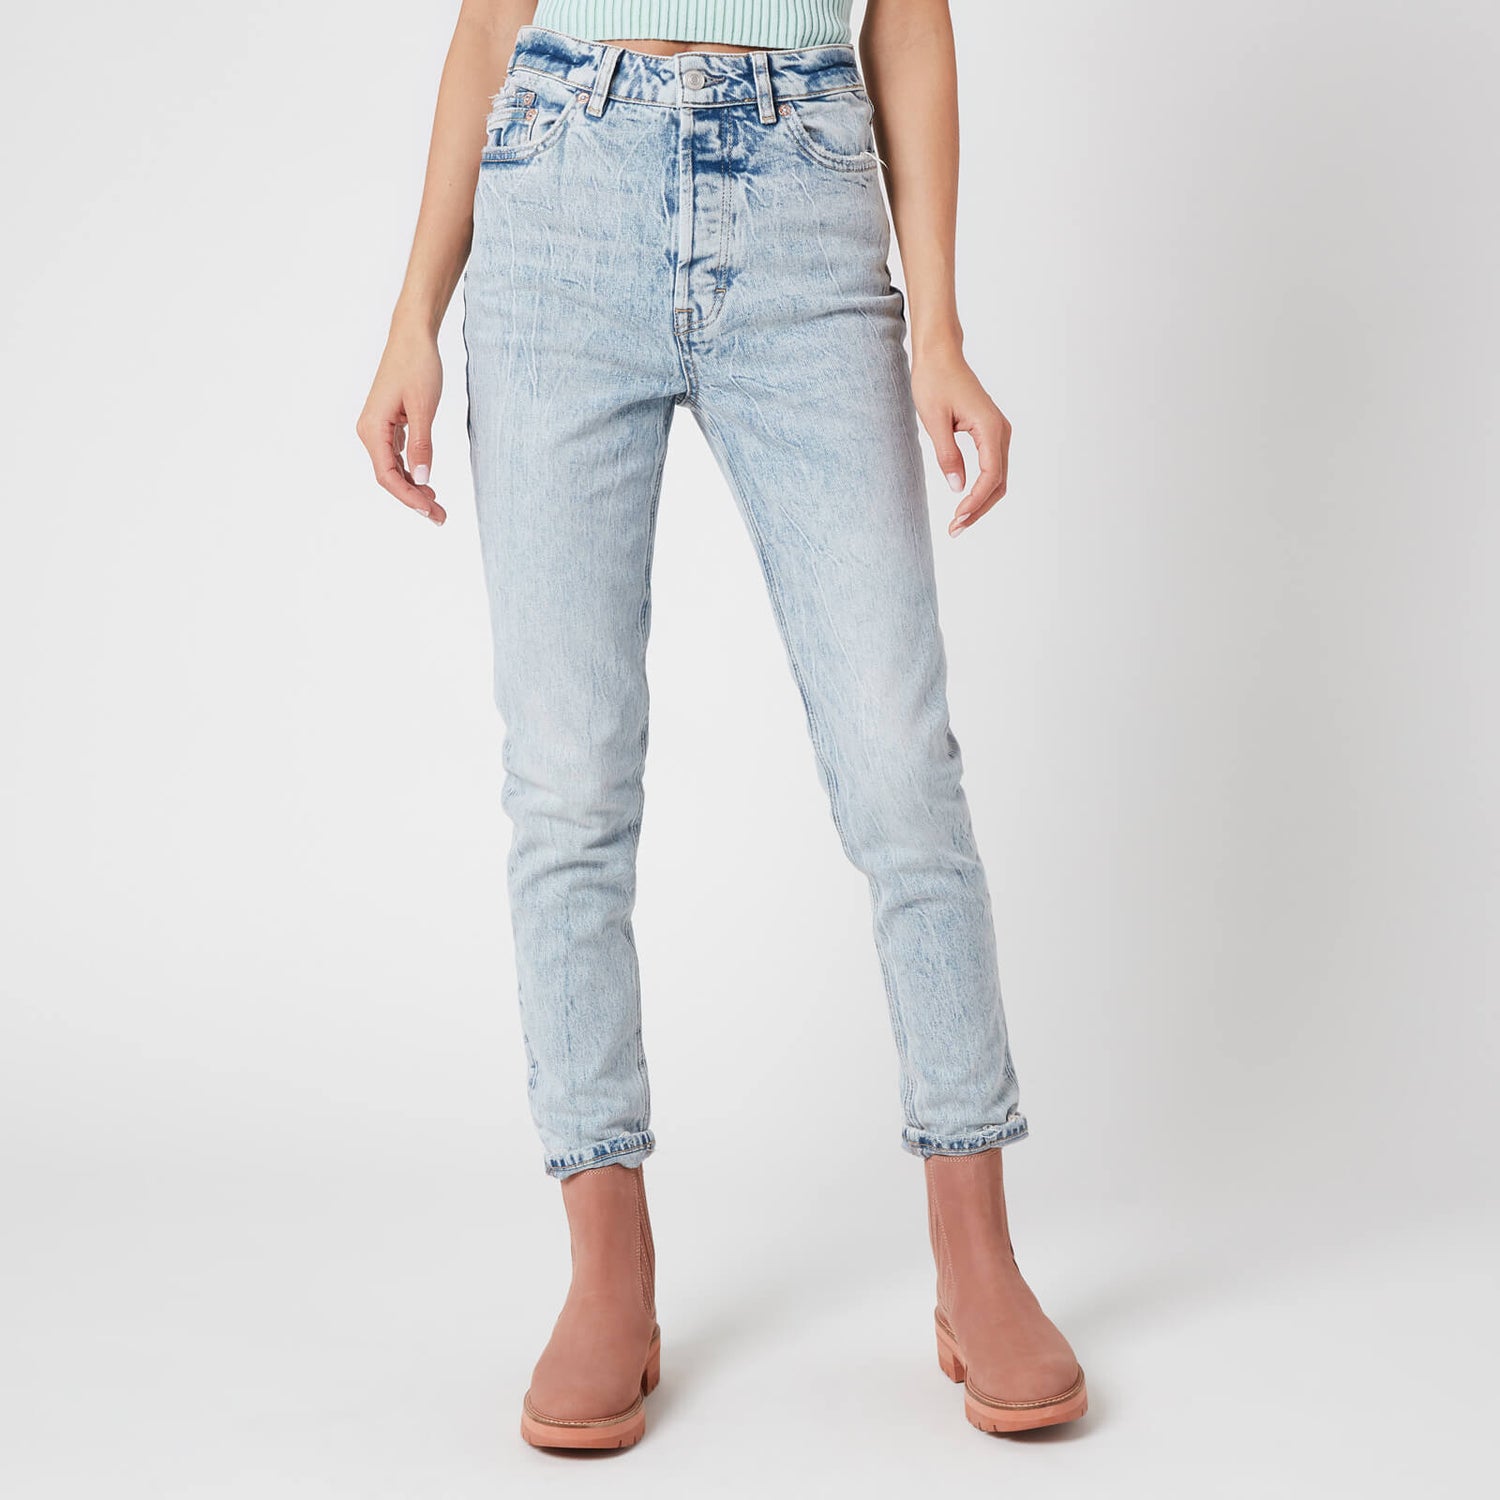 Free People Women's Zuri Mom Jeans - Lived In Blue